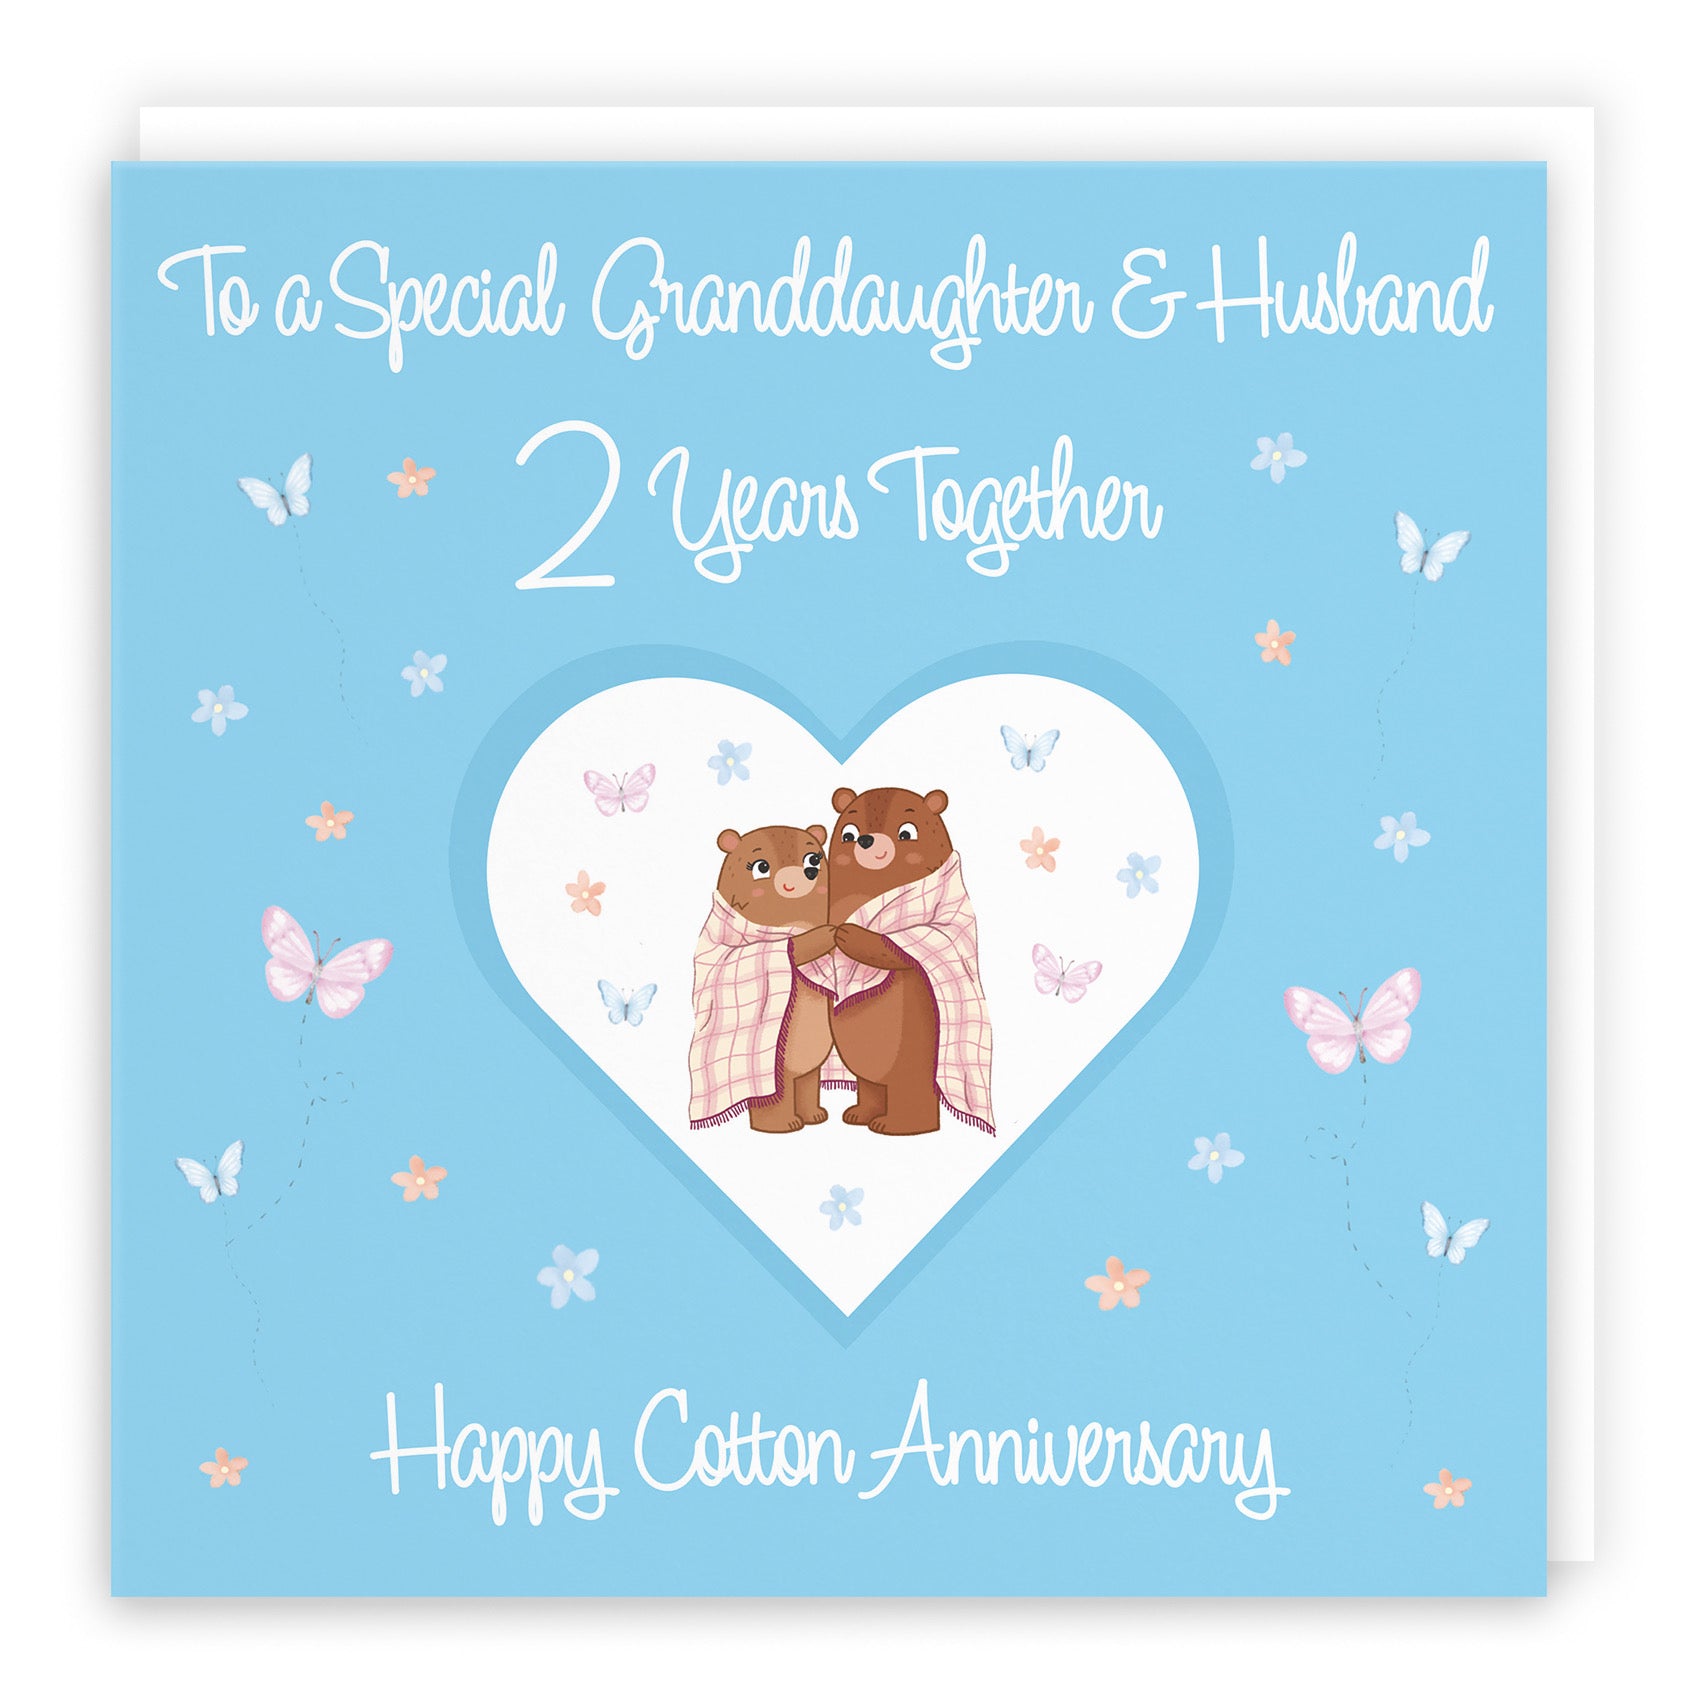 Large Granddaughter & Husband 2nd Anniversary Card Romantic Meadows - Default Title (B0CXY572FD)